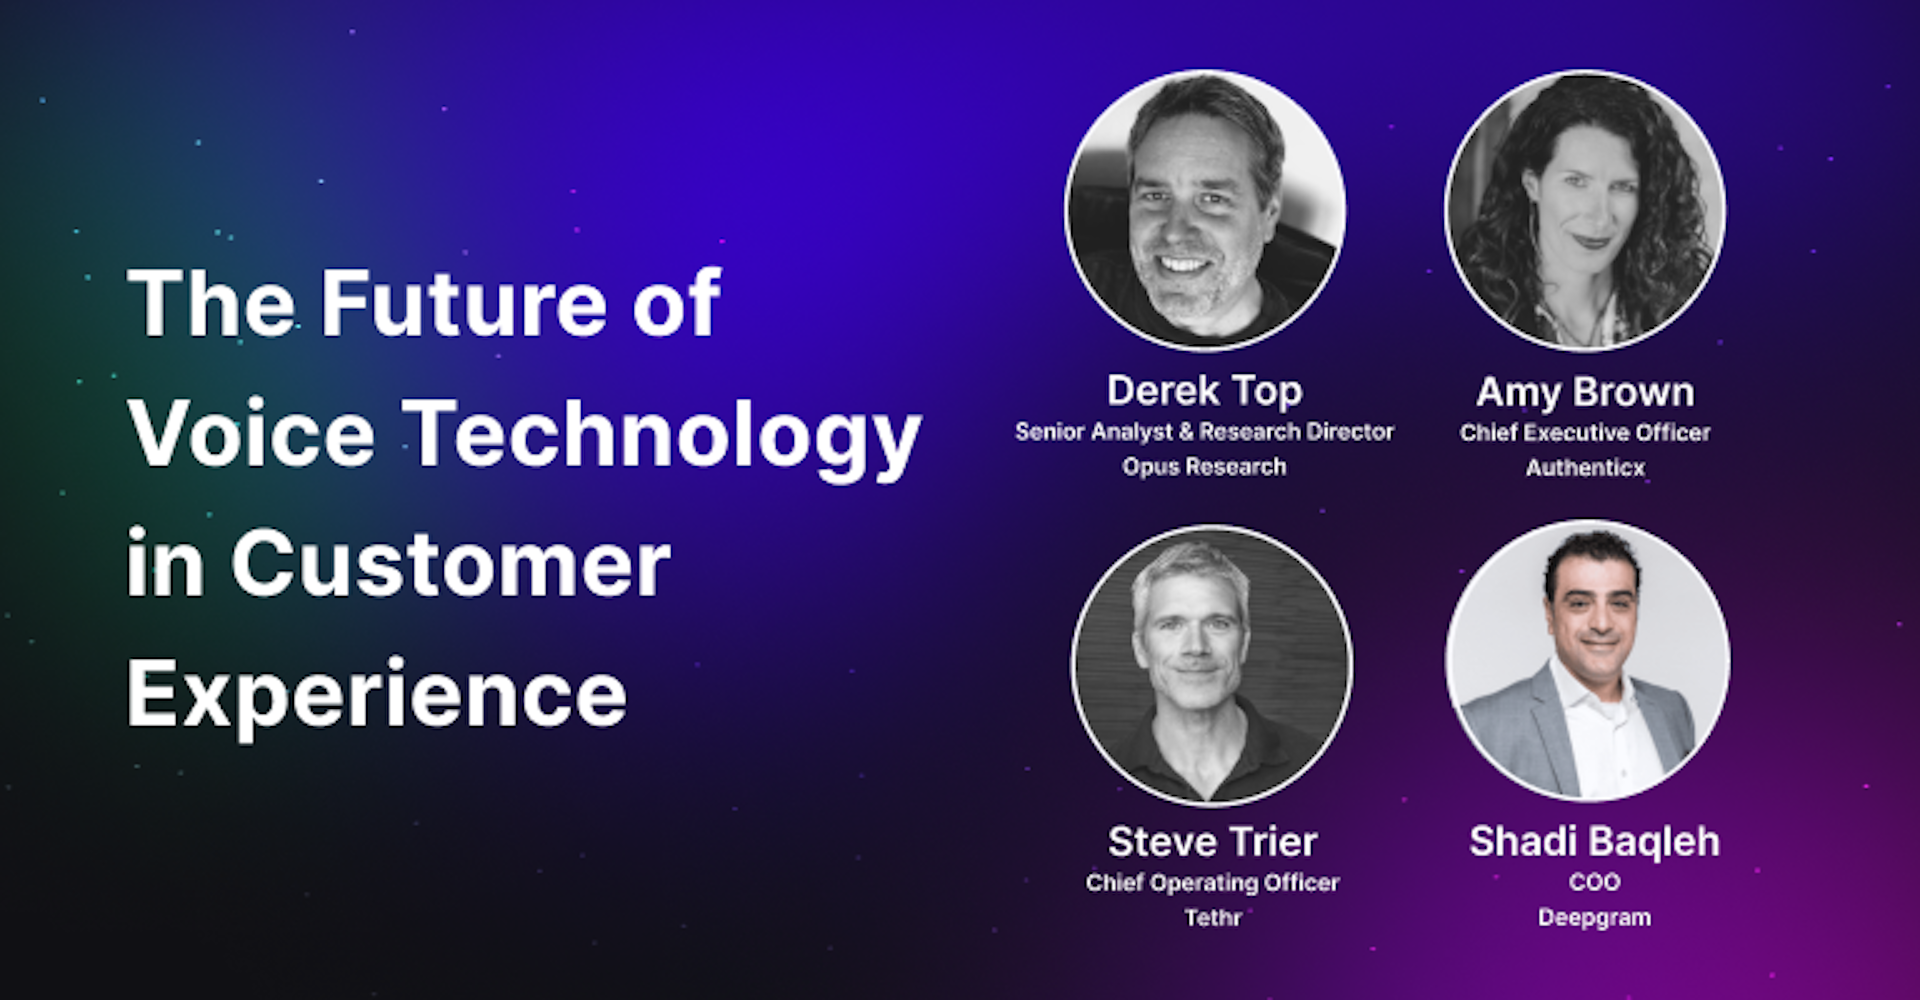 The Future of Voice Technology in Customer Experience